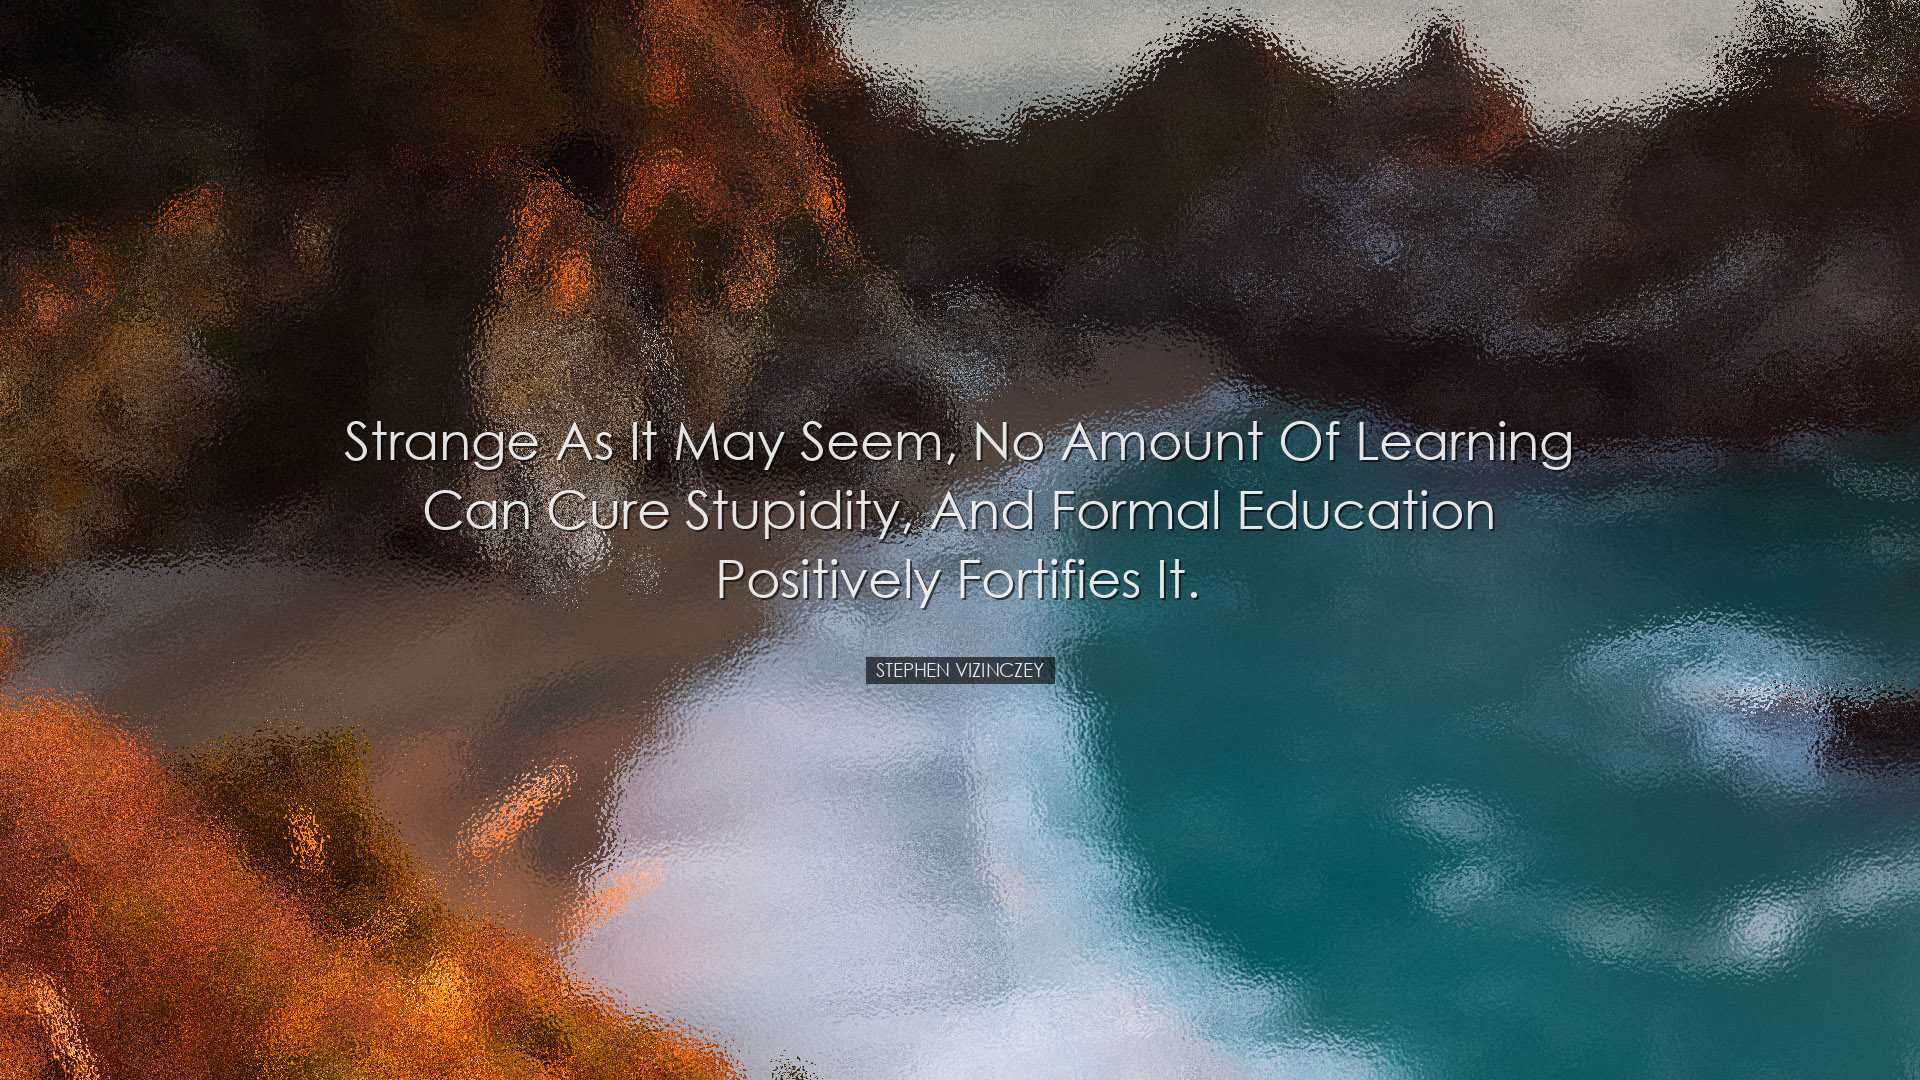 Strange as it may seem, no amount of learning can cure stupidity,